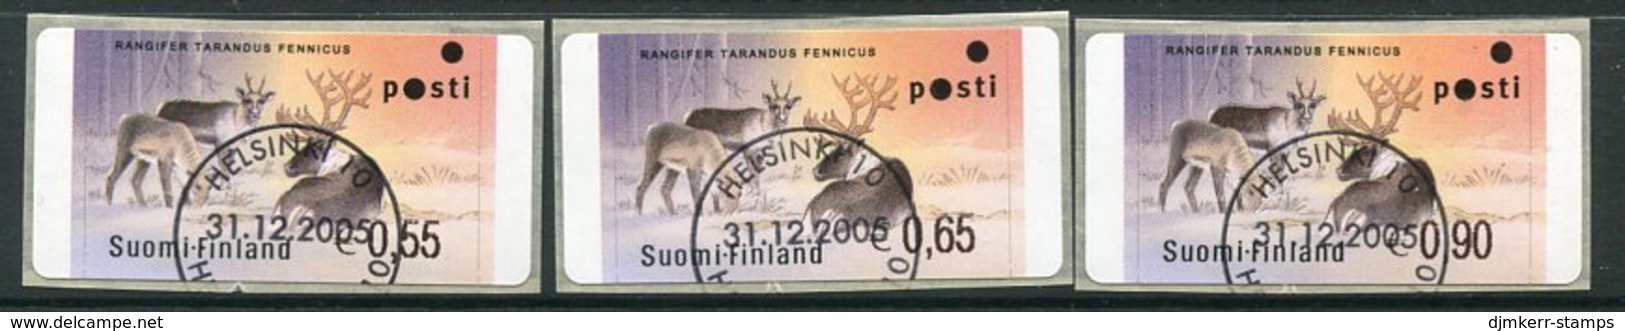 FINLAND 2003 Forests ATM, Three Values Used.  Michel 40 - Machine Labels [ATM]